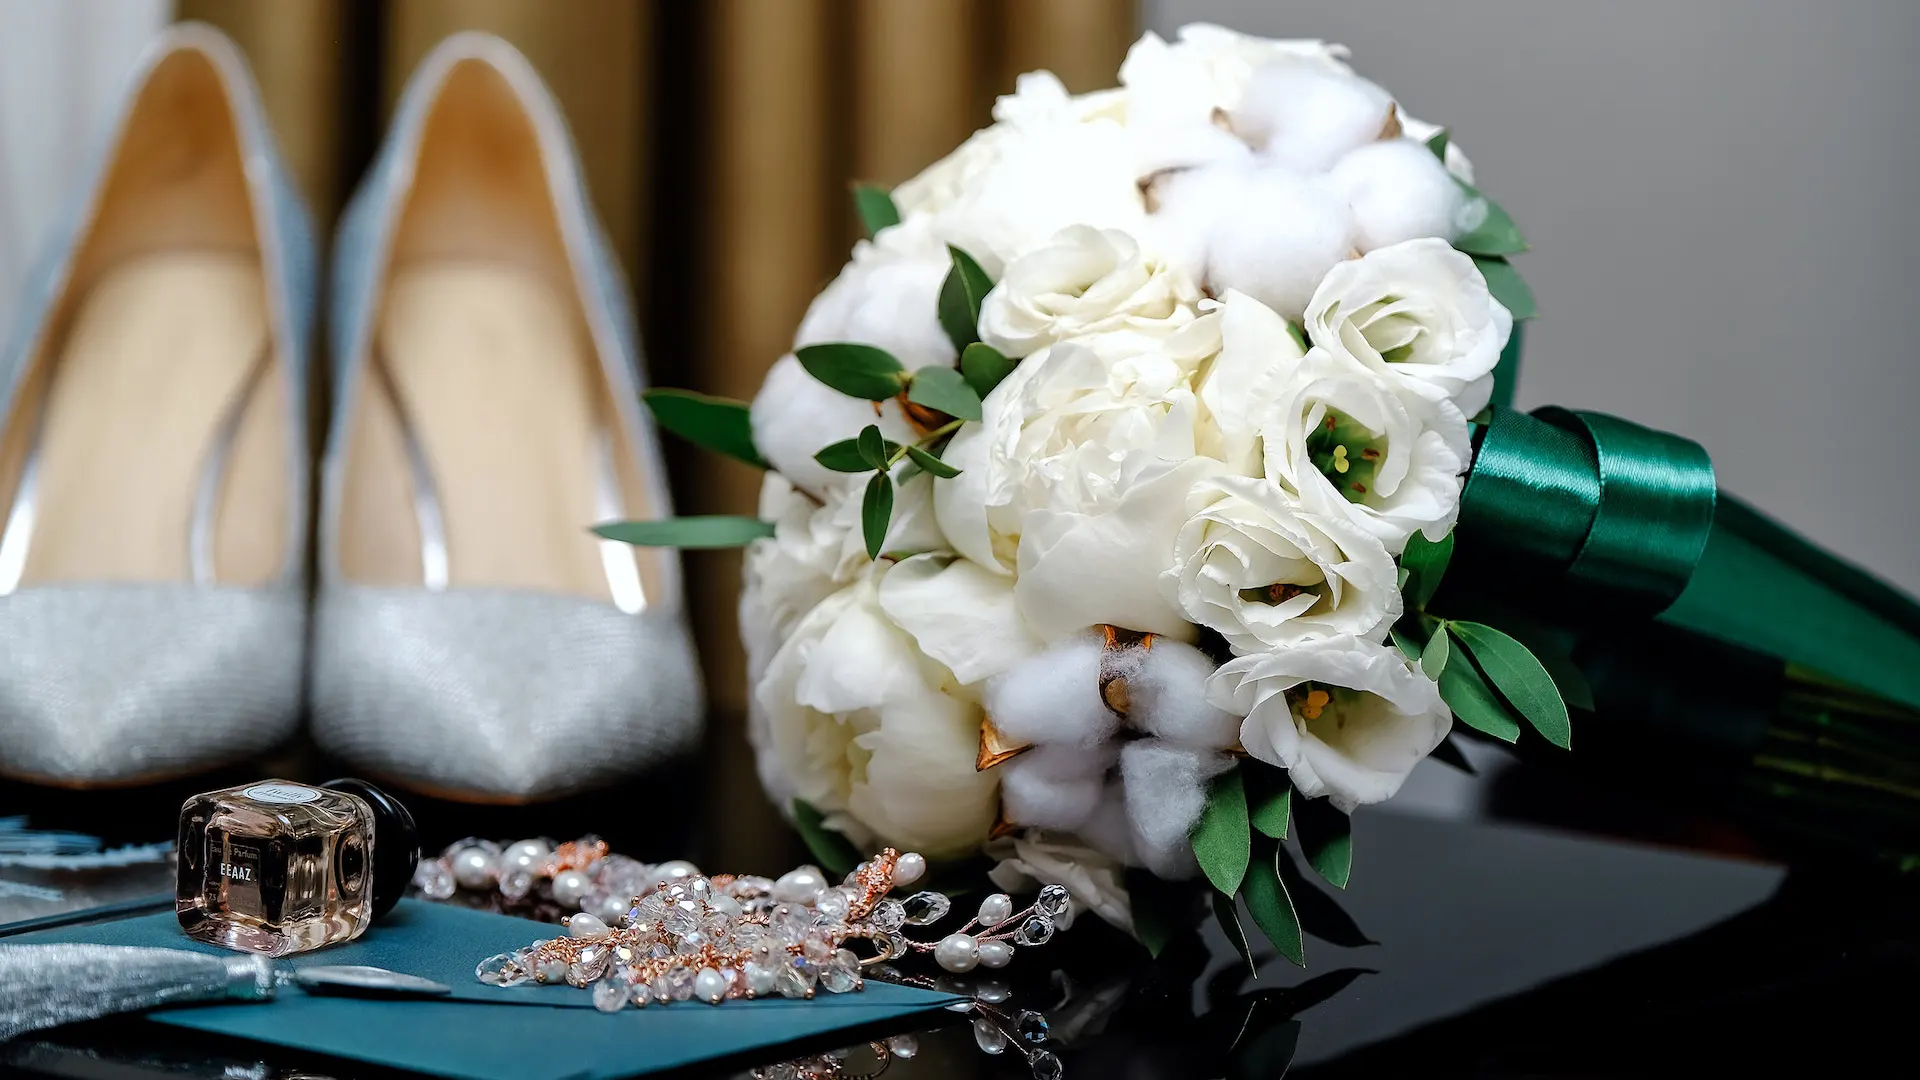 Close up of silver women's pump shoes, bouquet of white flowers, earrings, and perfume sitting on a table ready for a special event